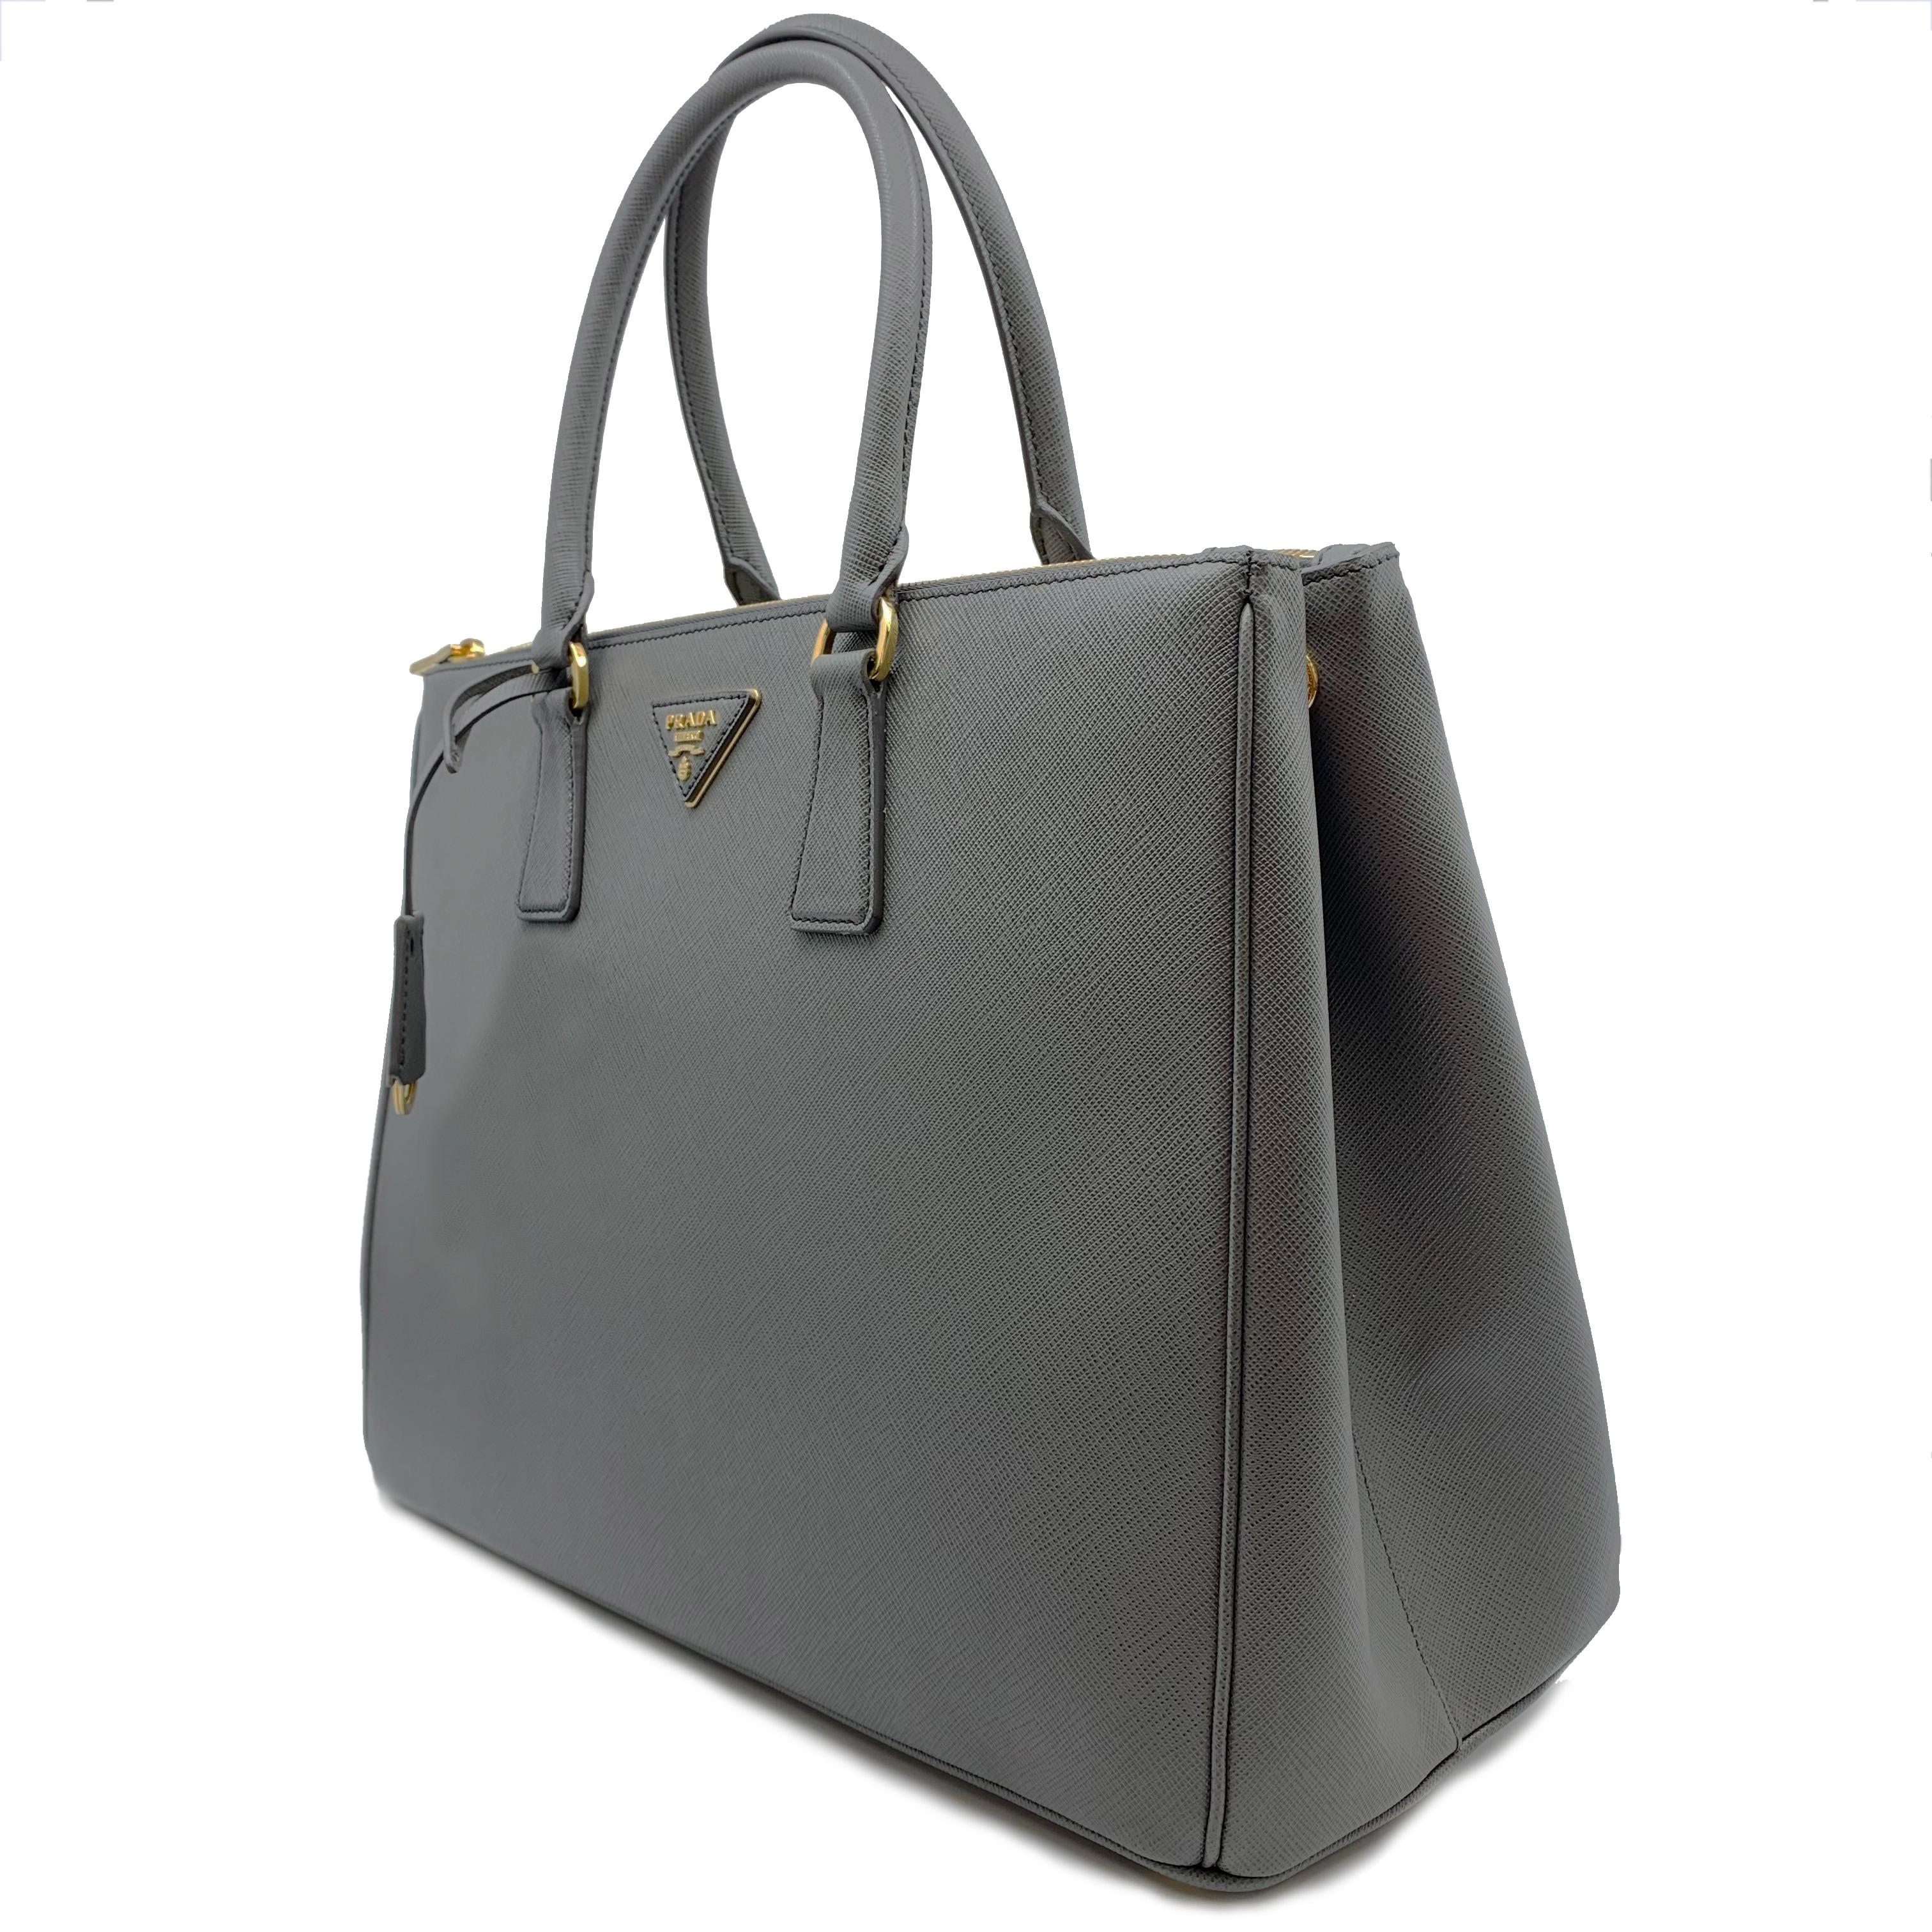 gray leather tote